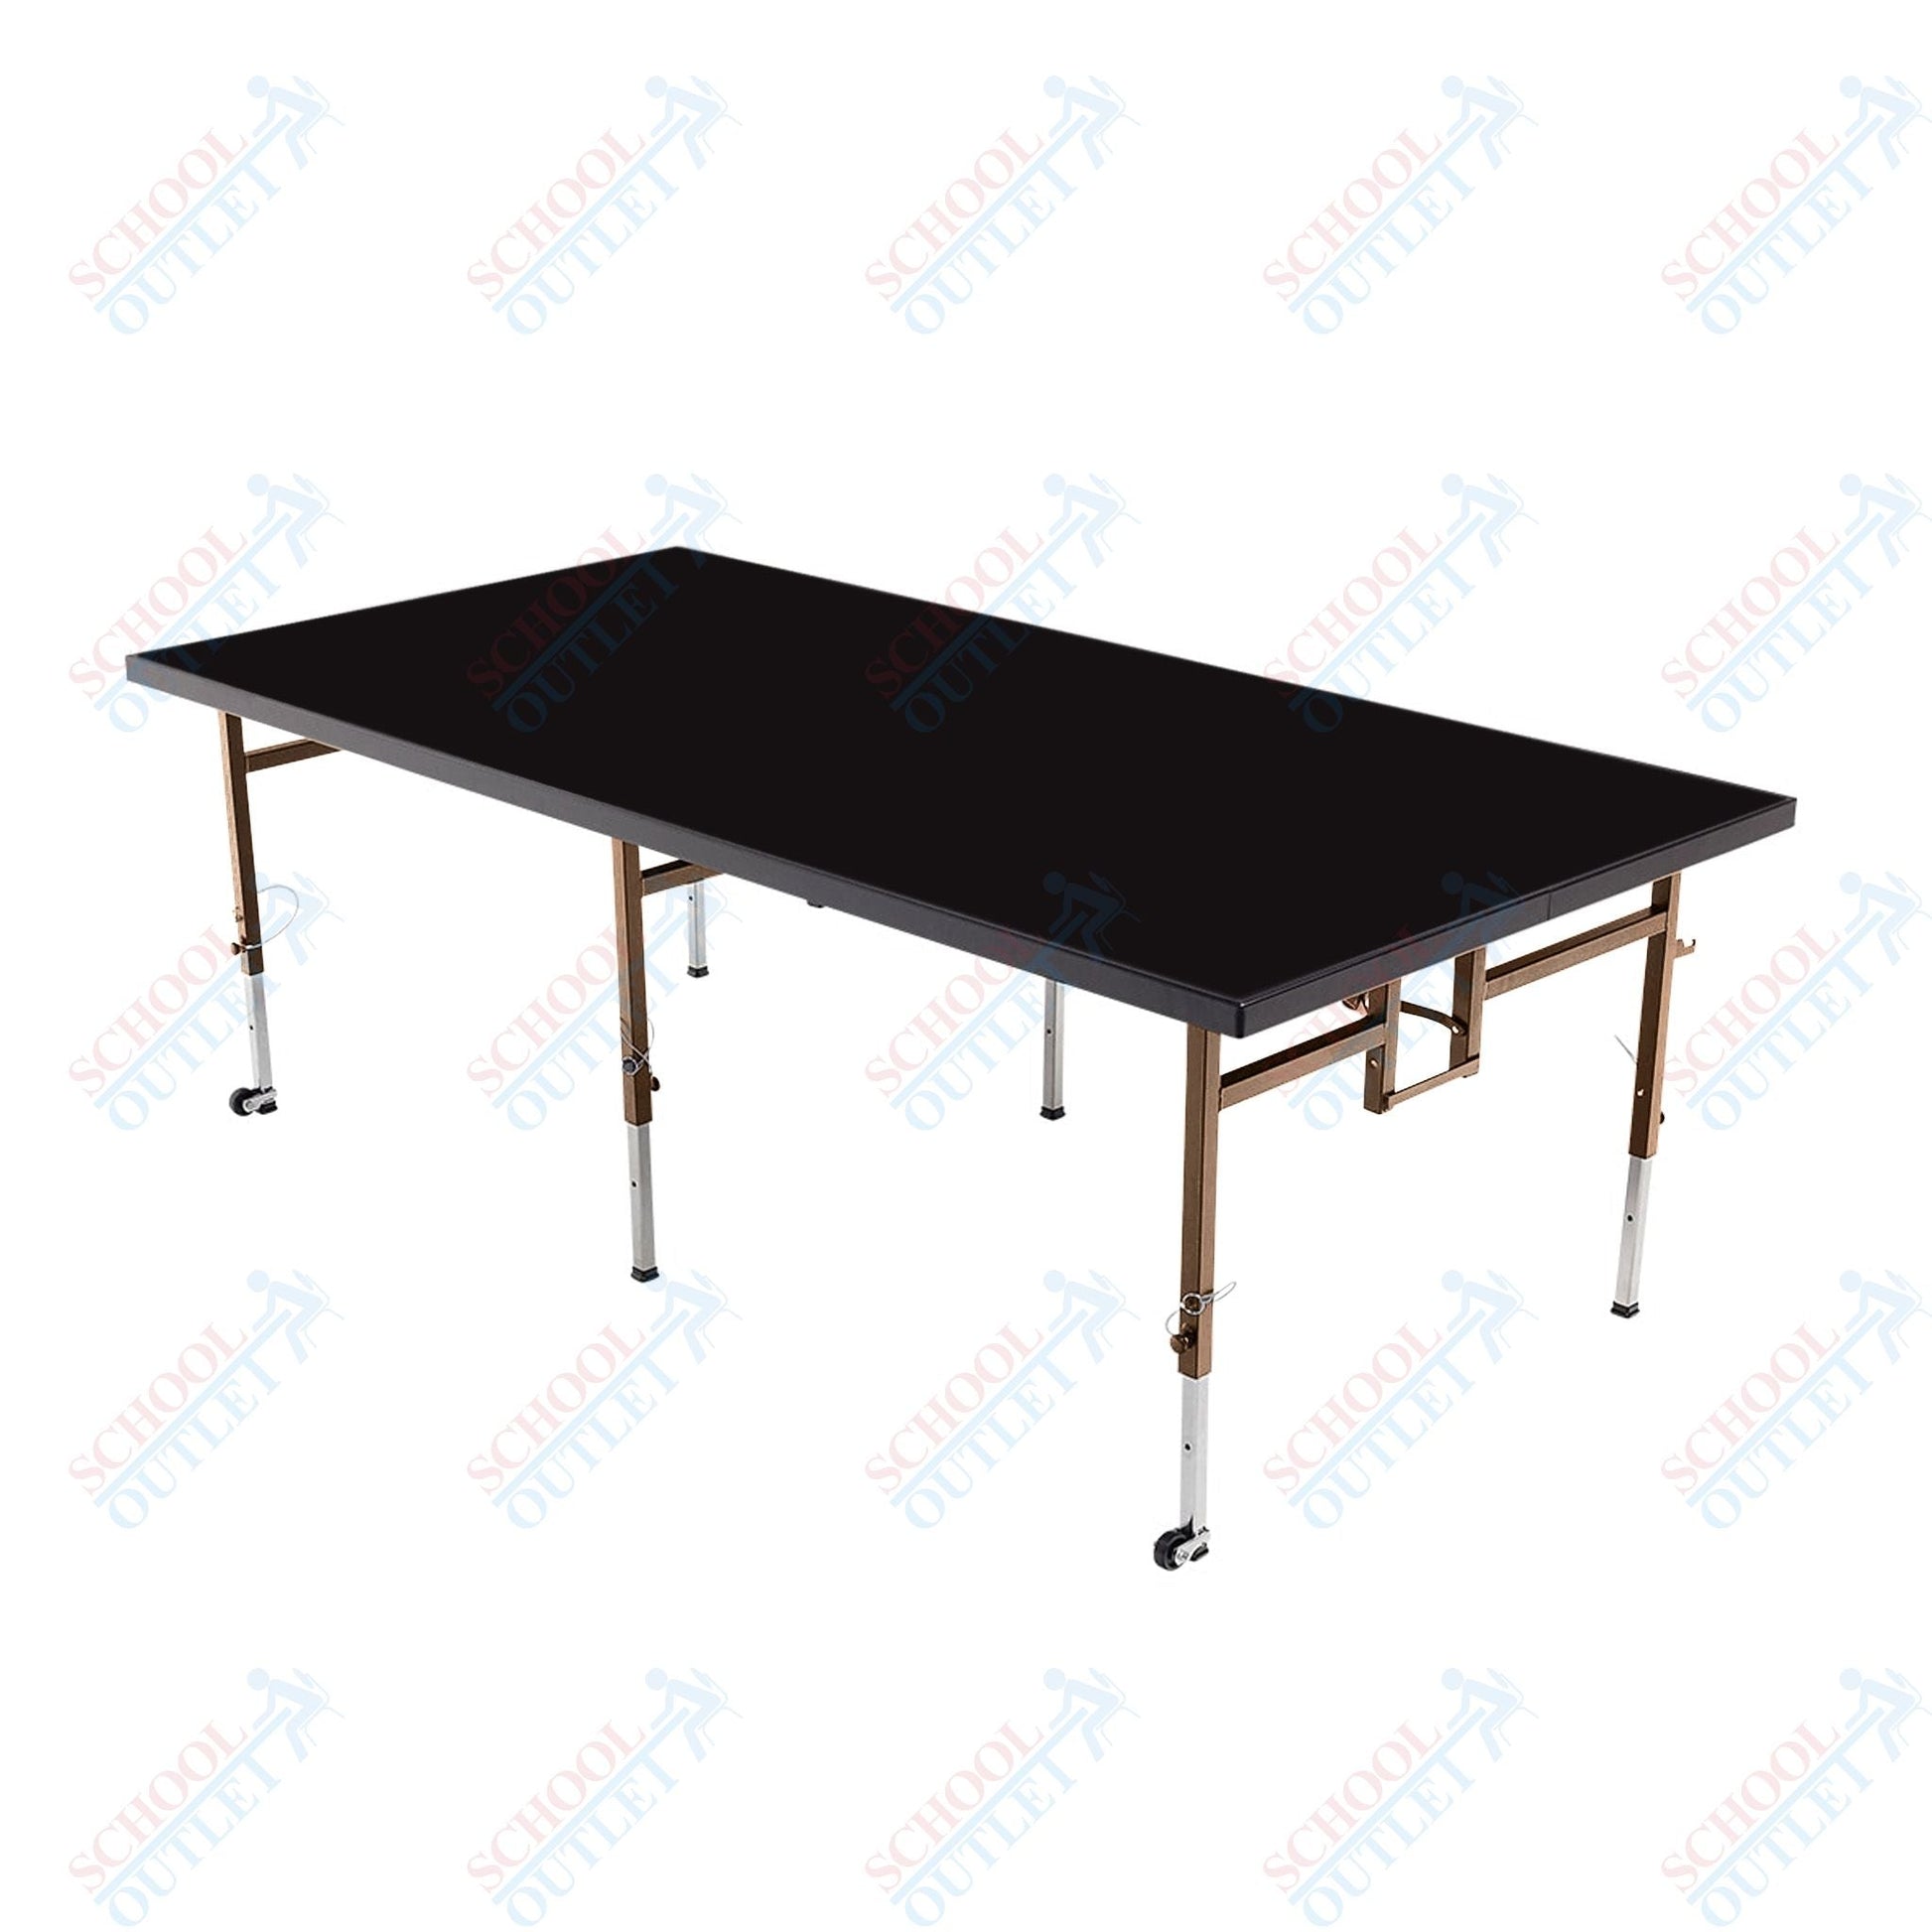 AmTab Adjustable Height Stage - Polypropylene Top - 36"W x 48"L x Adjustable 24" to 32"H (AmTab AMT-STA3424P) - SchoolOutlet